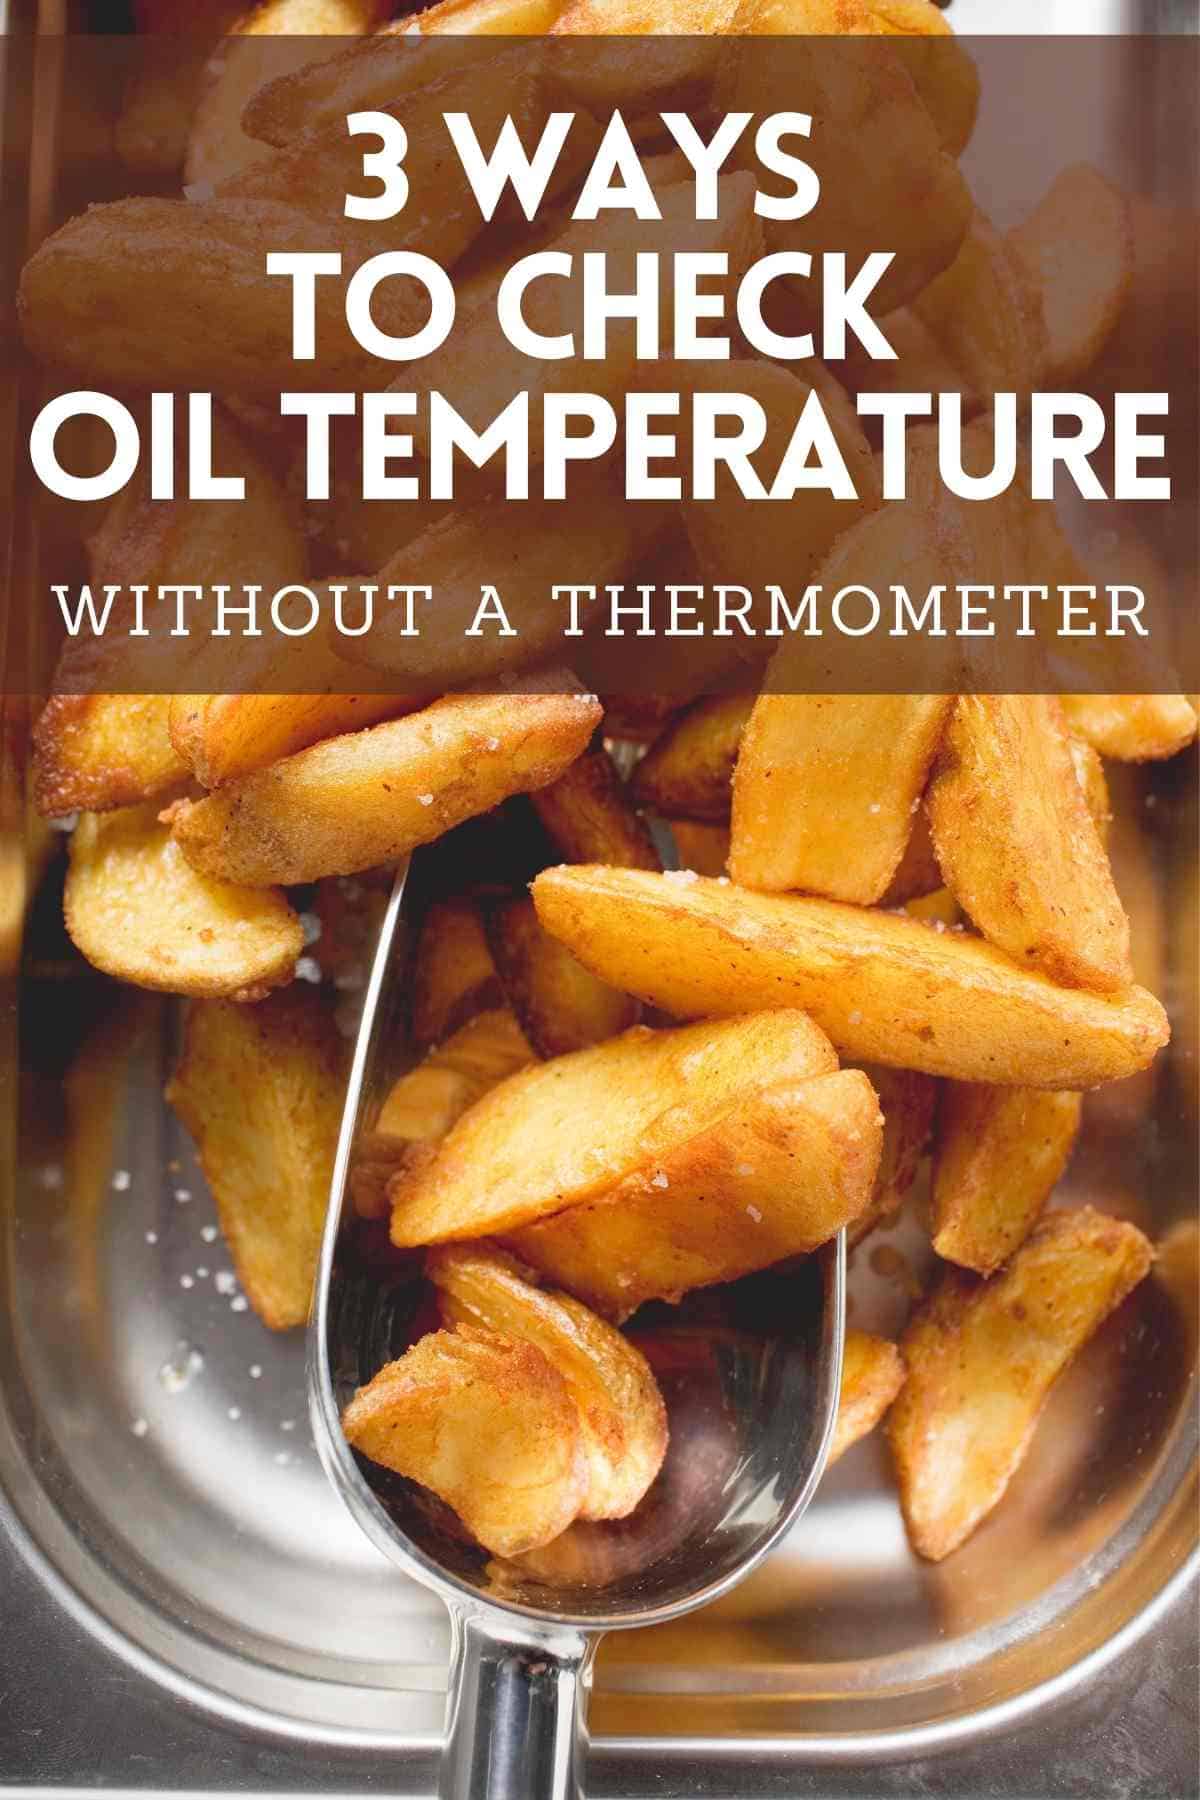 Deep Frying : 3 Ways to check oil temperature without a